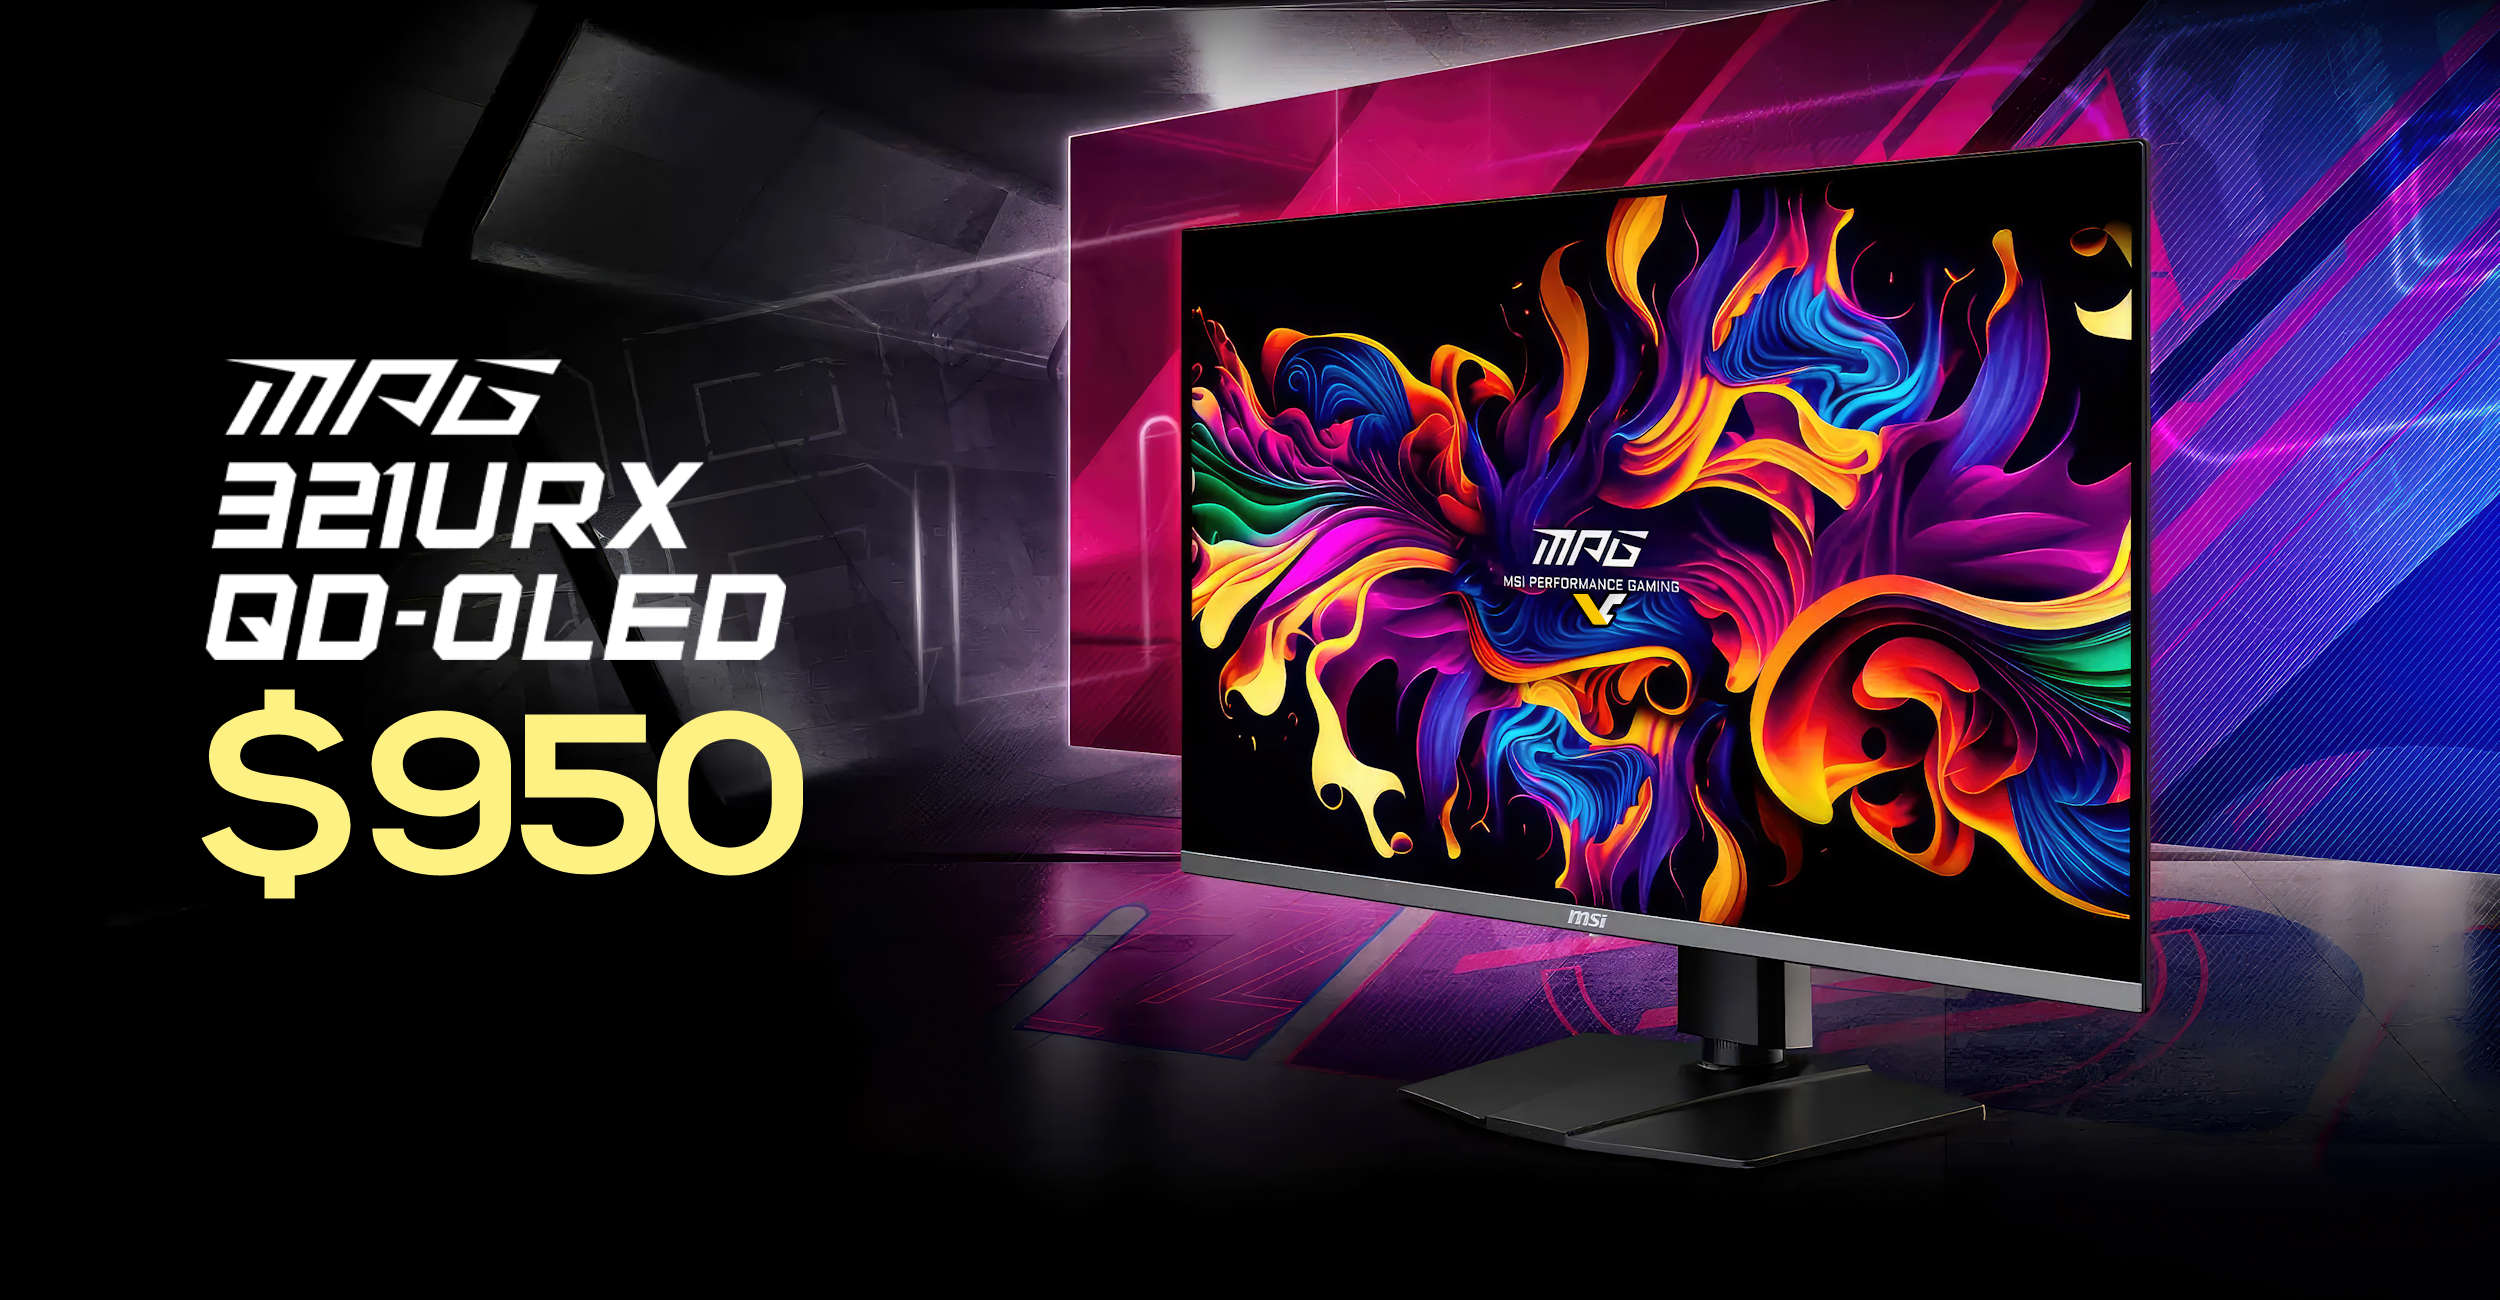 MSI’s MPG 321URX 4K 240Hz QD-OLED Monitor Now Available for 0 – A Game-Changer in Gaming Technology